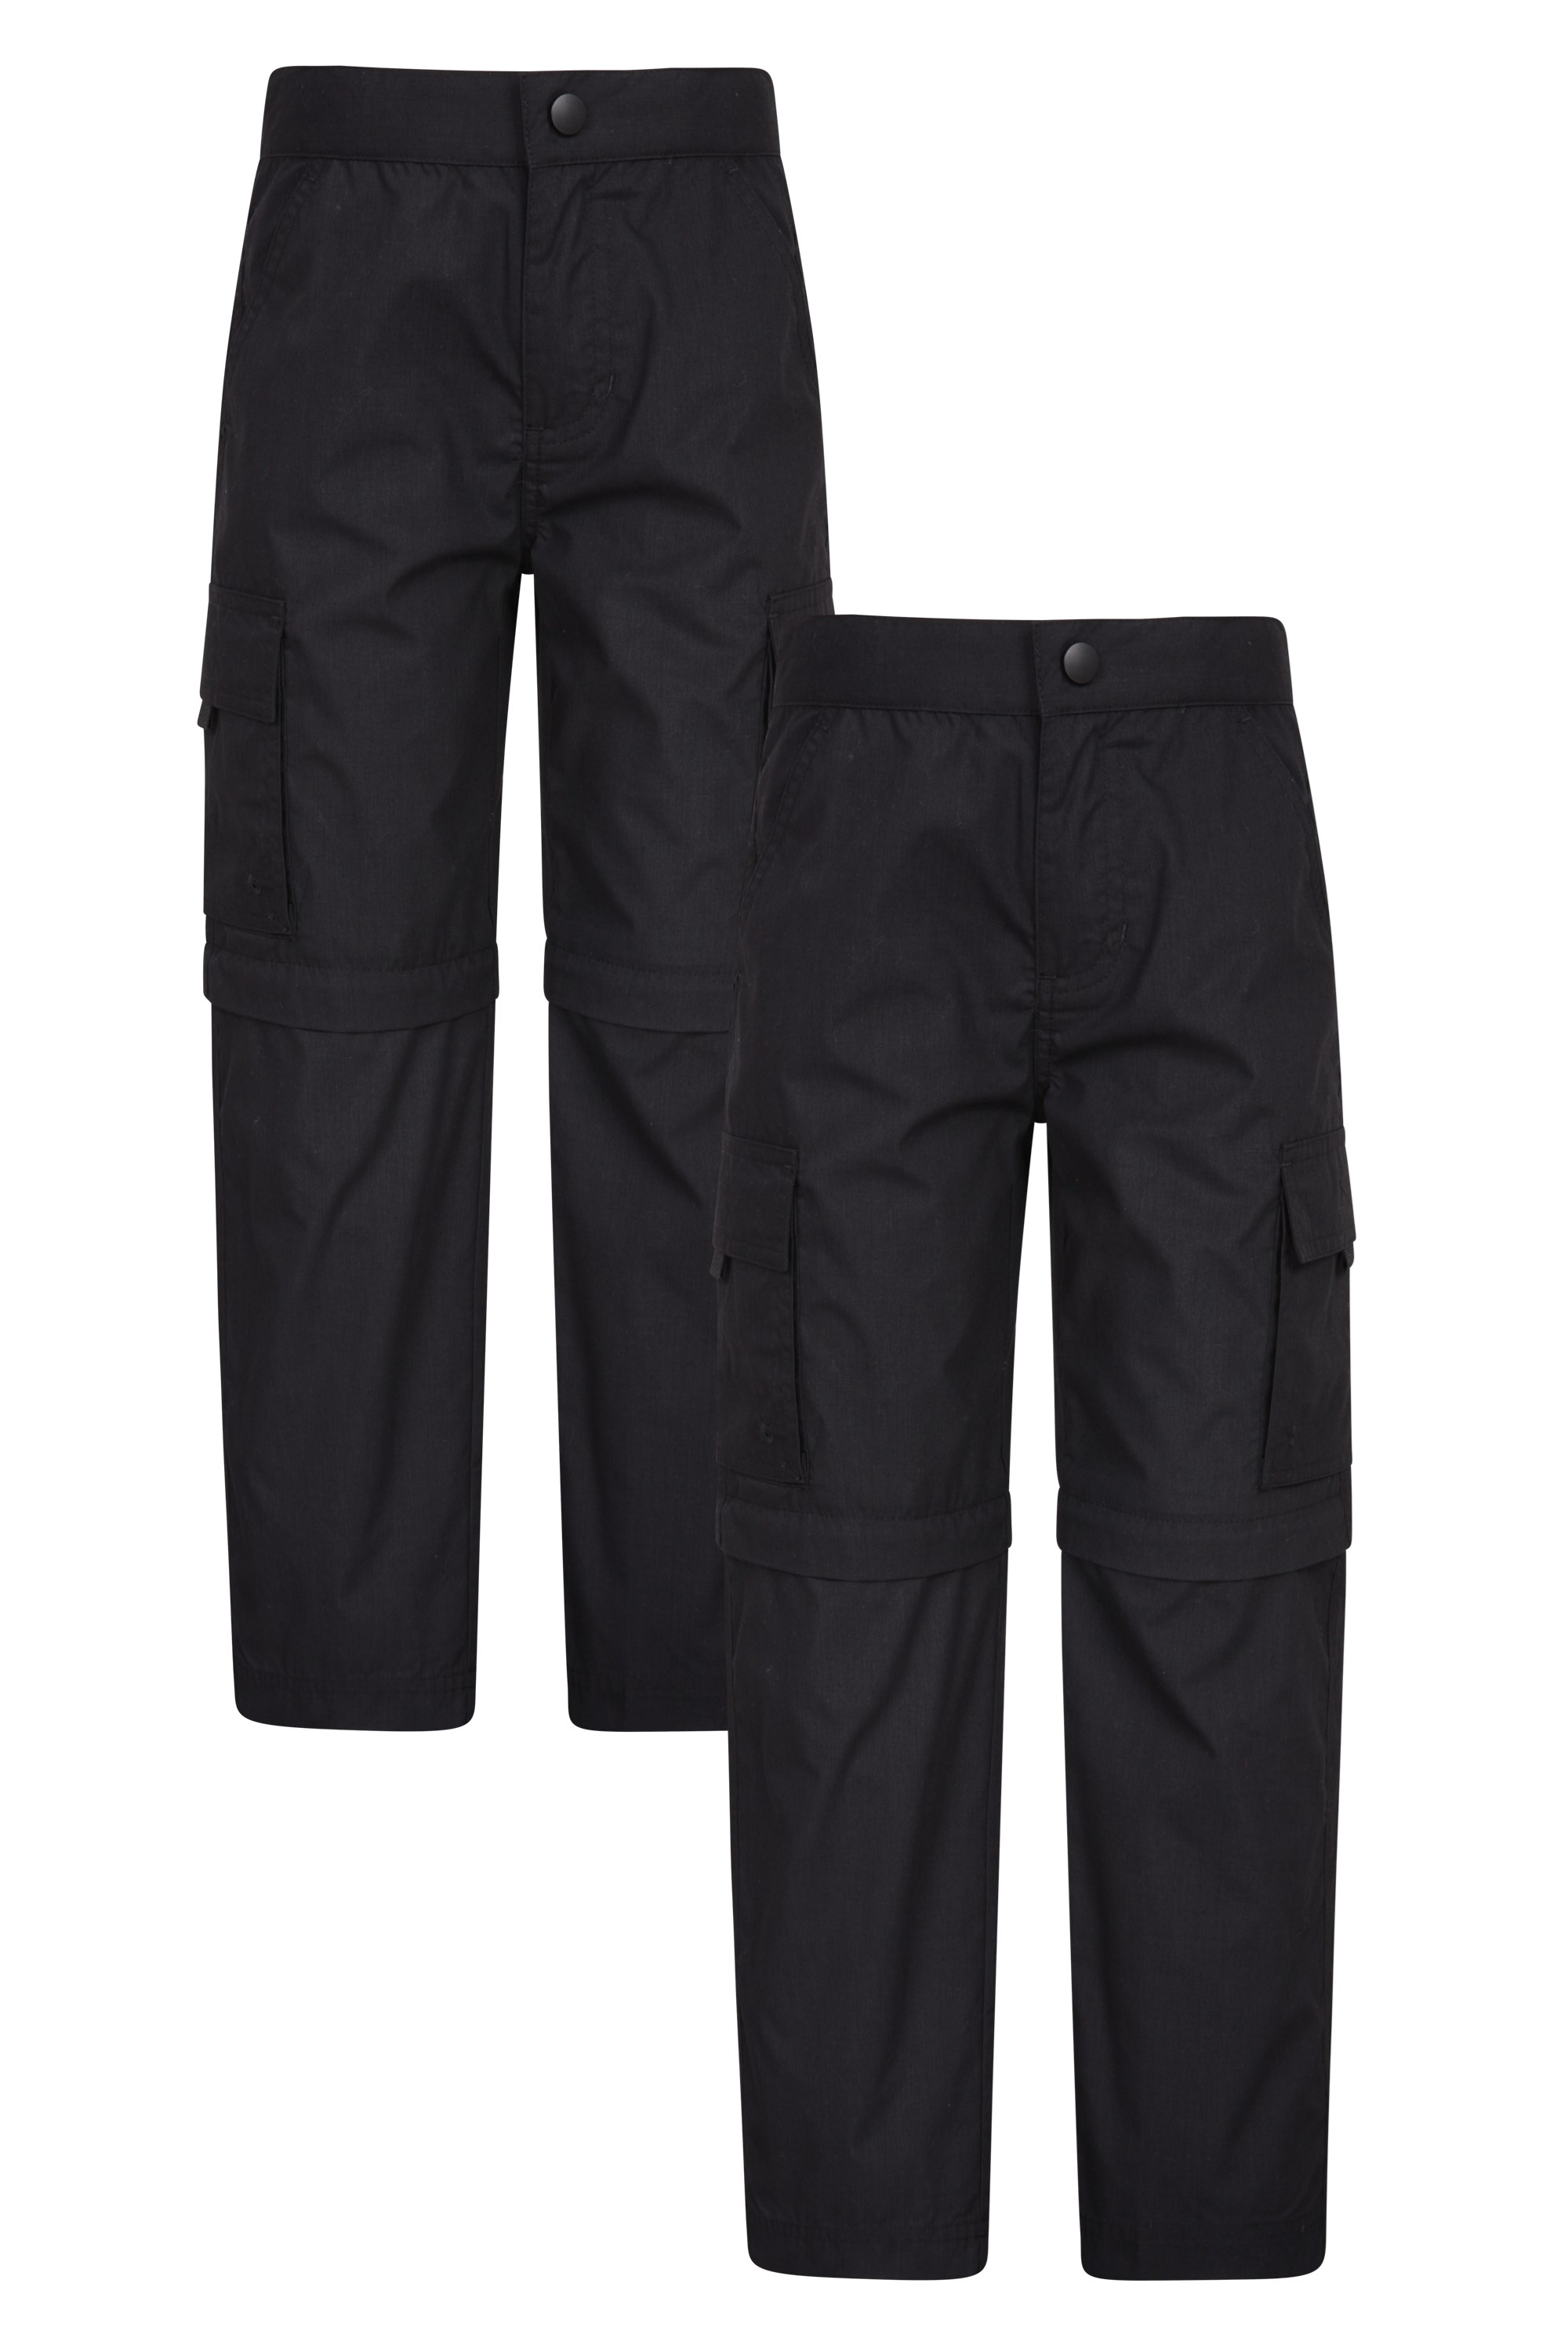 Active Kids Zip-off Trousers 2-pack - Black